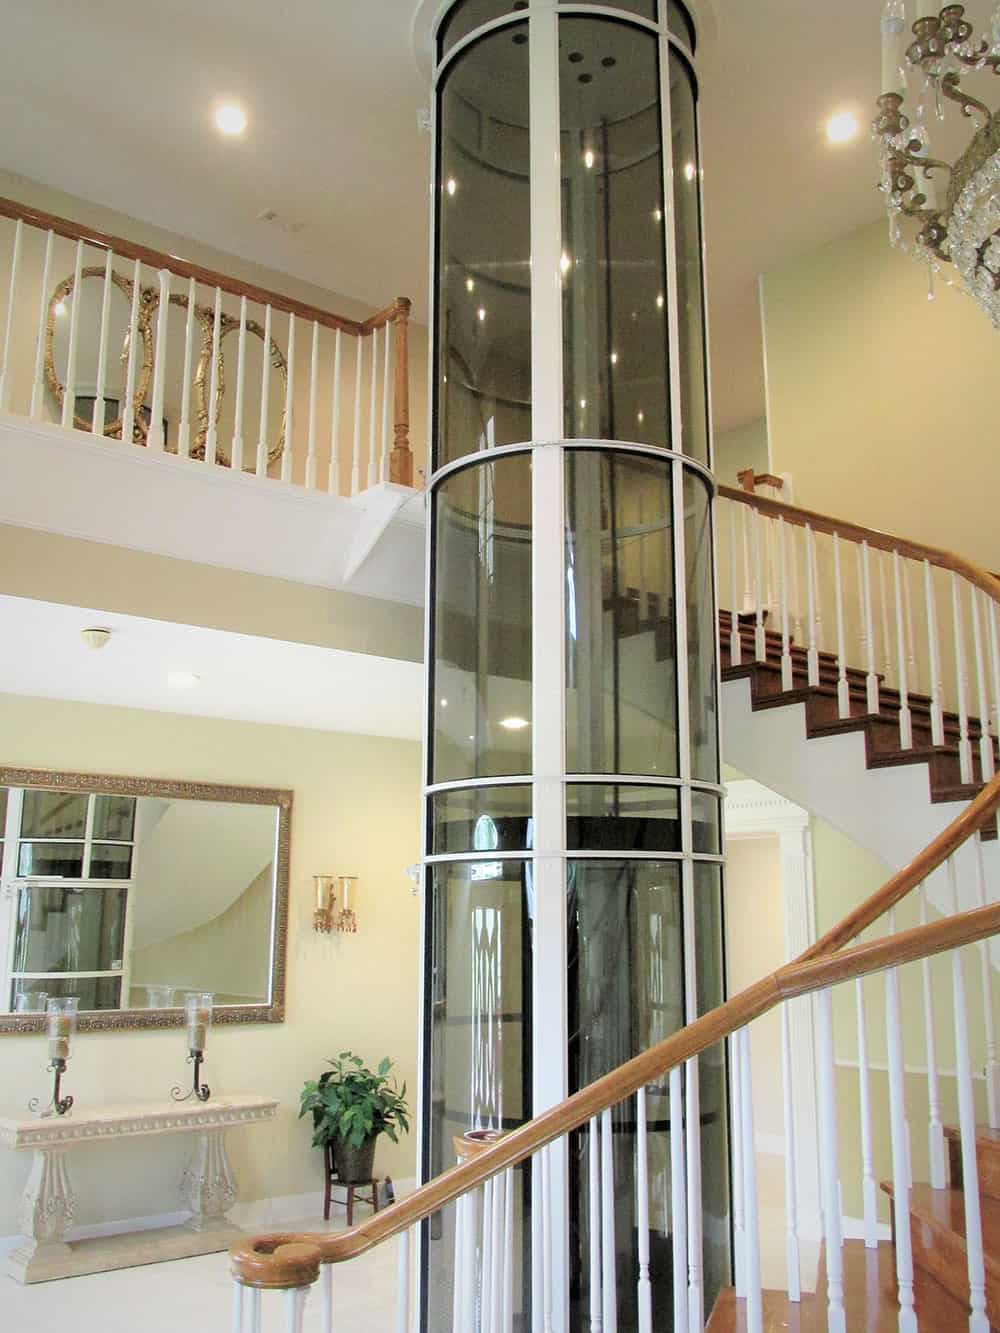 pneumatic vacuum elevator installed in the center of a winding staircase in a home in hitchcock texas just southwest of houston